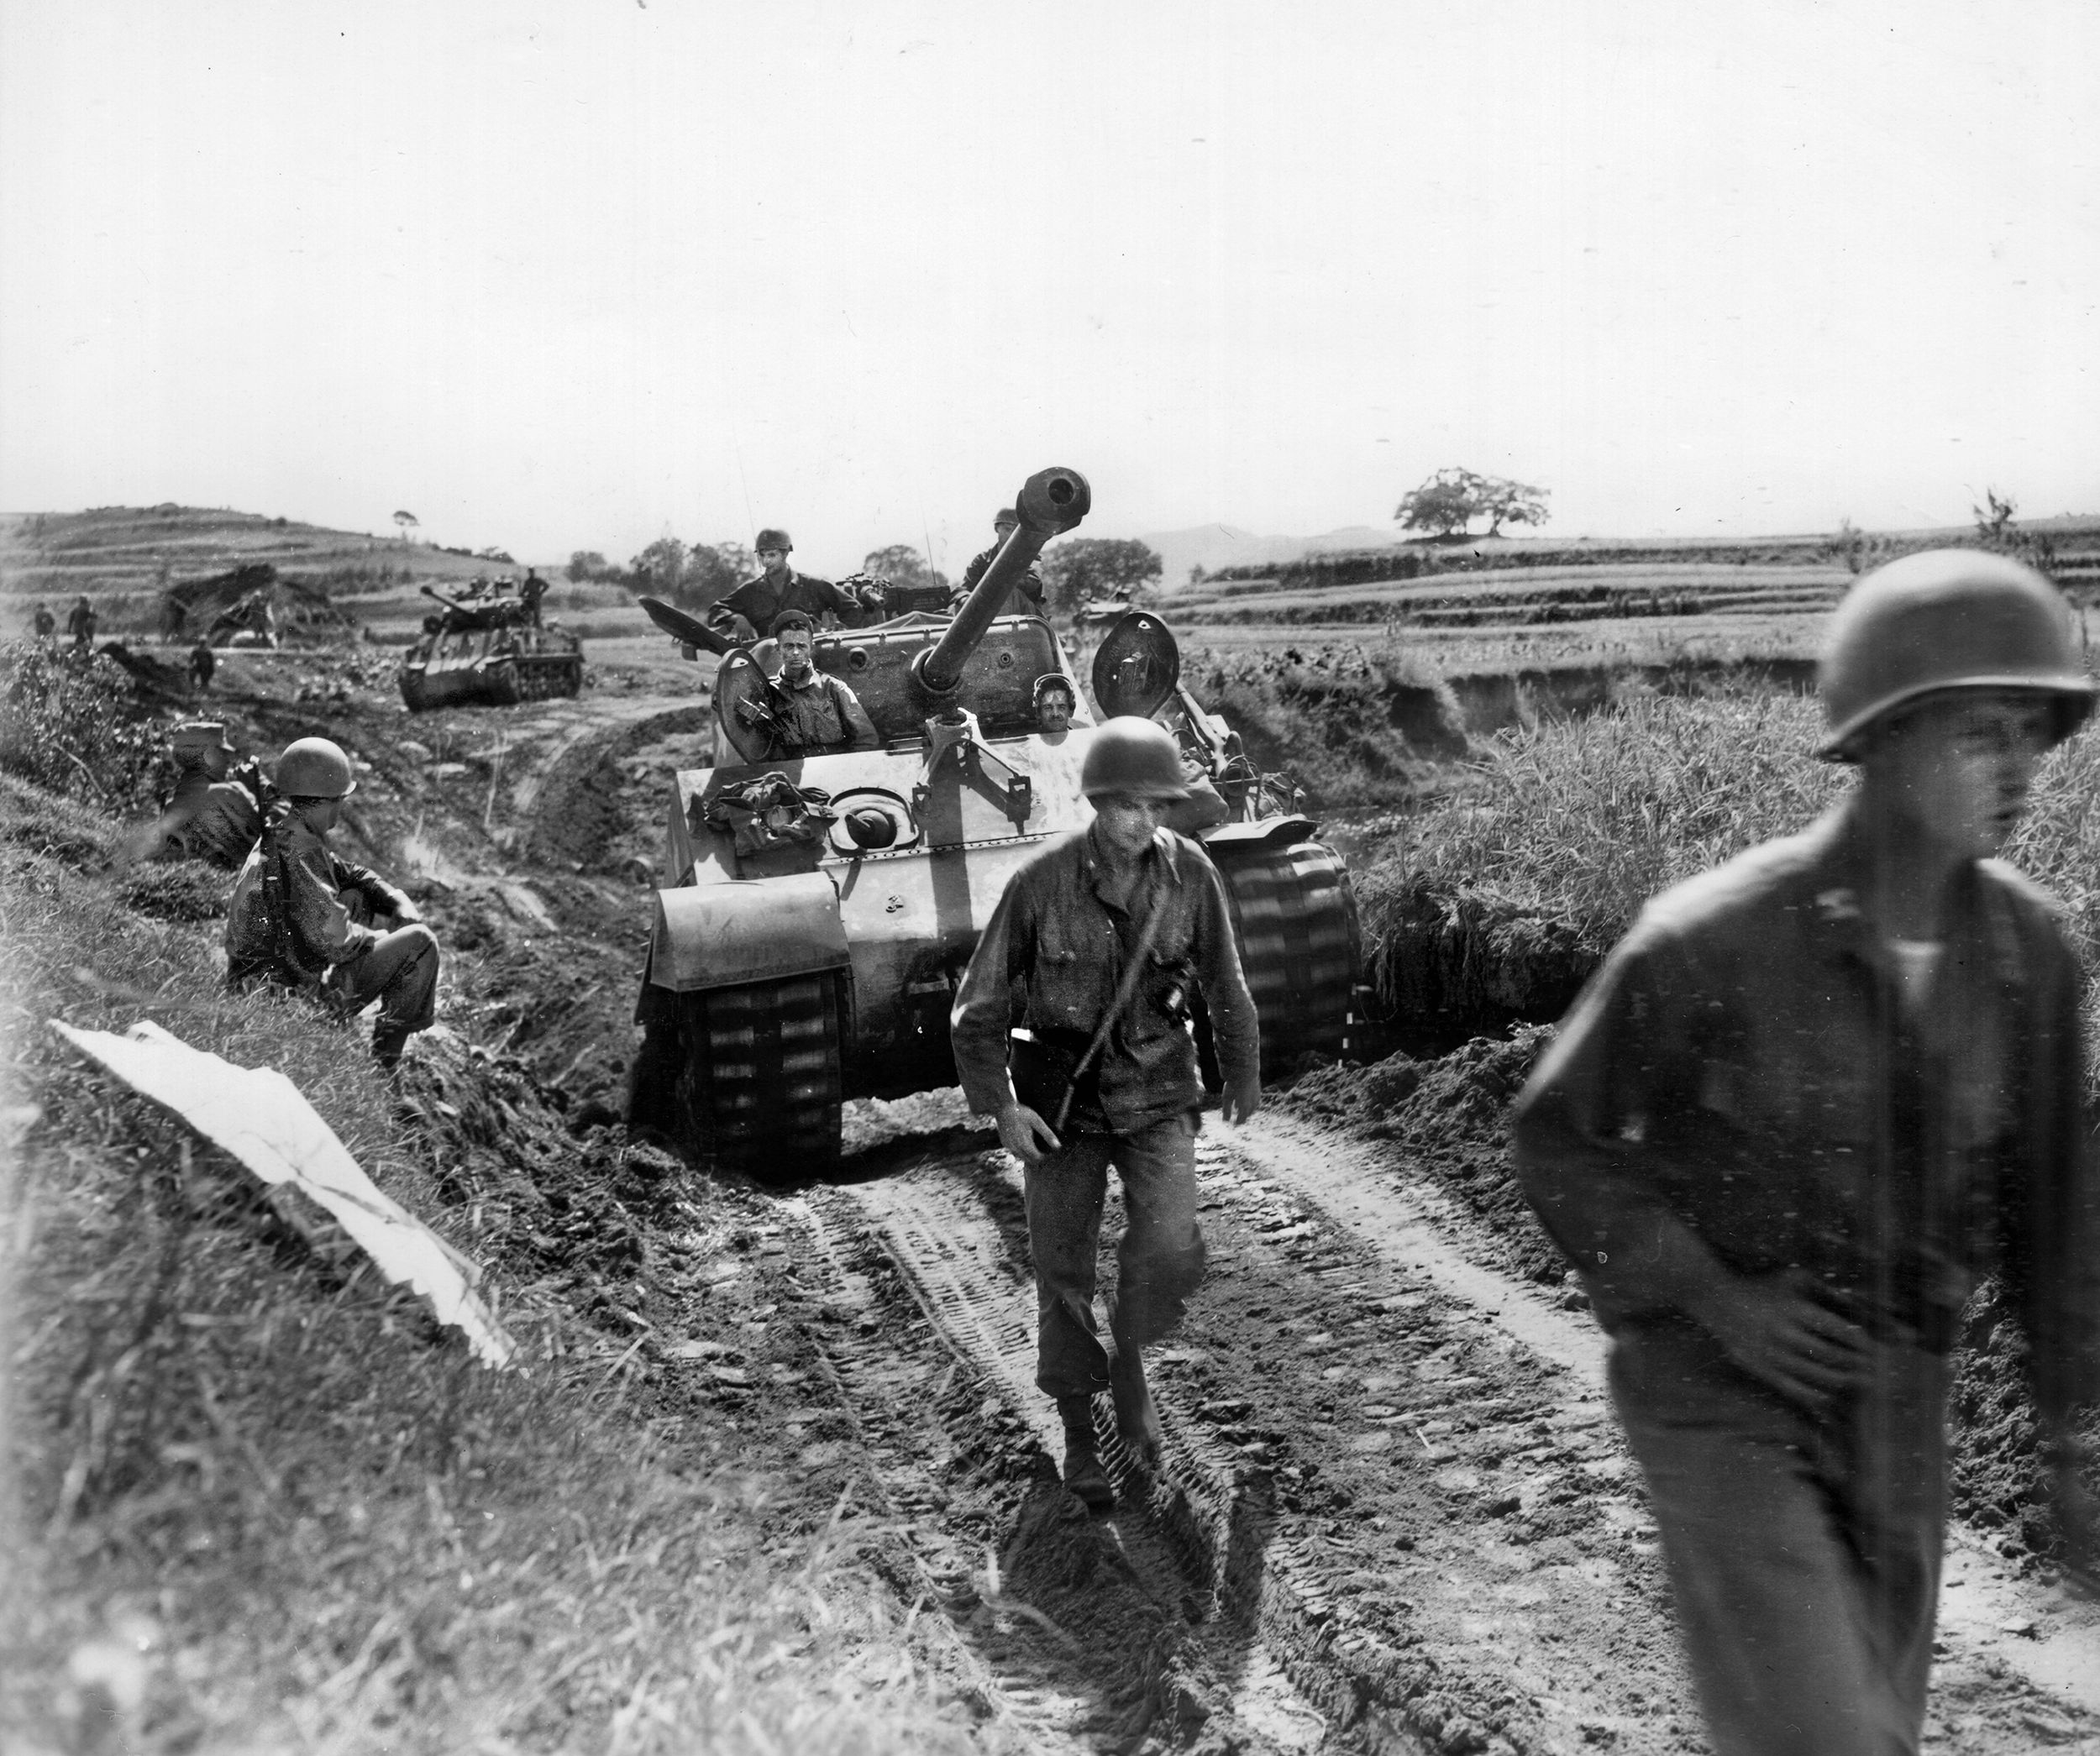 American troops accompanied by M4 Sherman tanks advance against the North Korean forces near Chongju, South Korea in September 1950. The United Nations forces kept pushing north hoping to destroy remnants of the North Korean People’s Army and put an end to the war. 